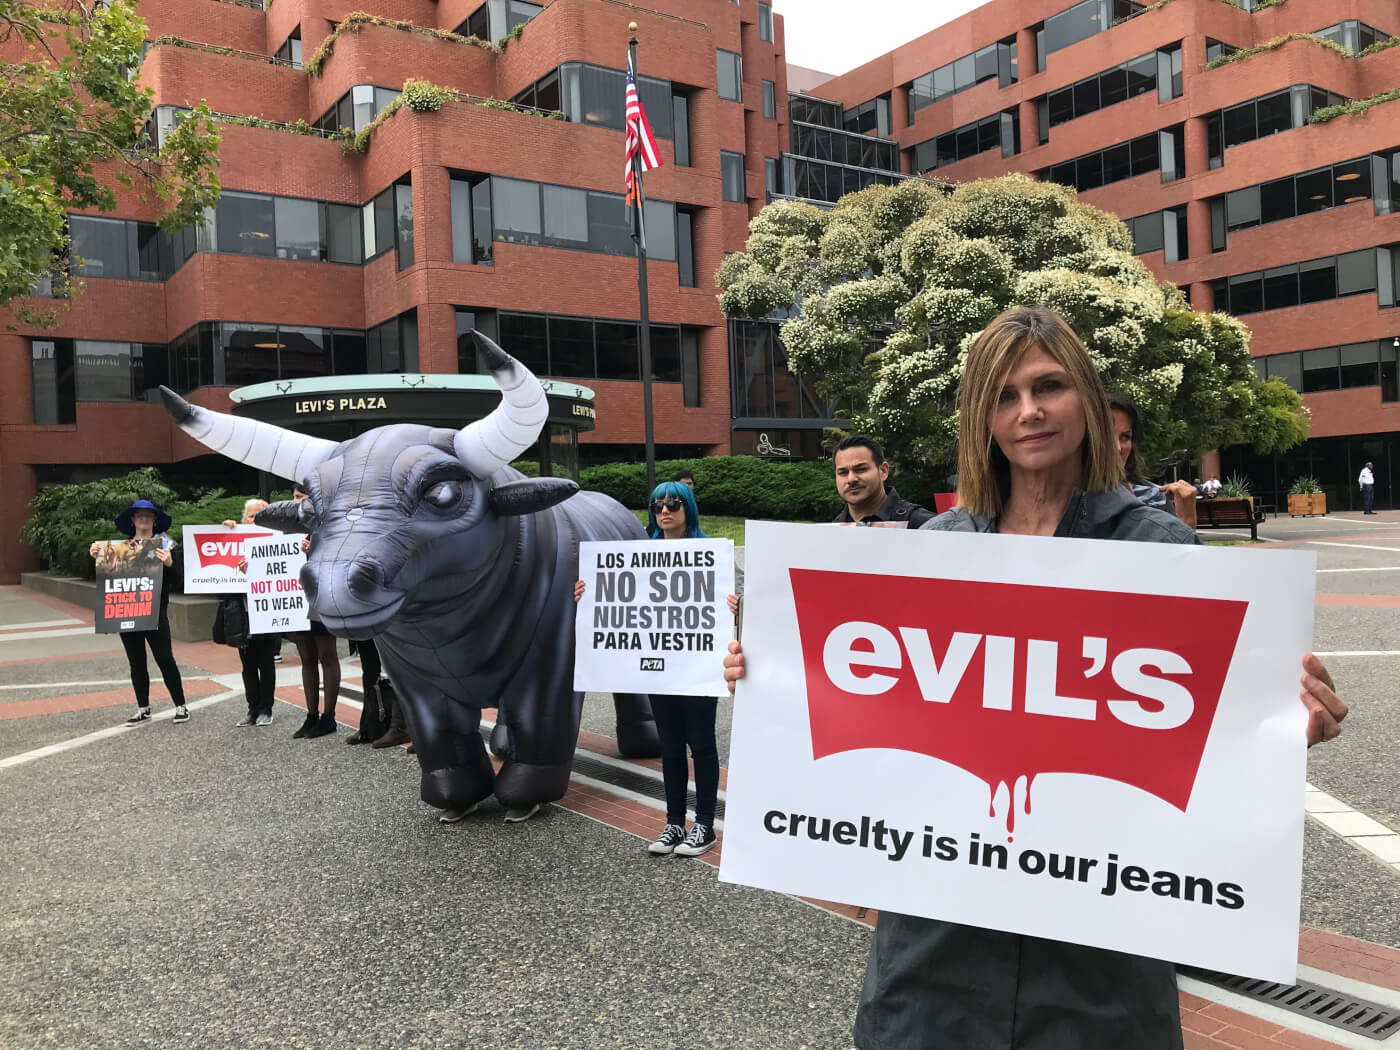 Levi's Asked to Look Into Suppliers' Slaughter Methods | PETA